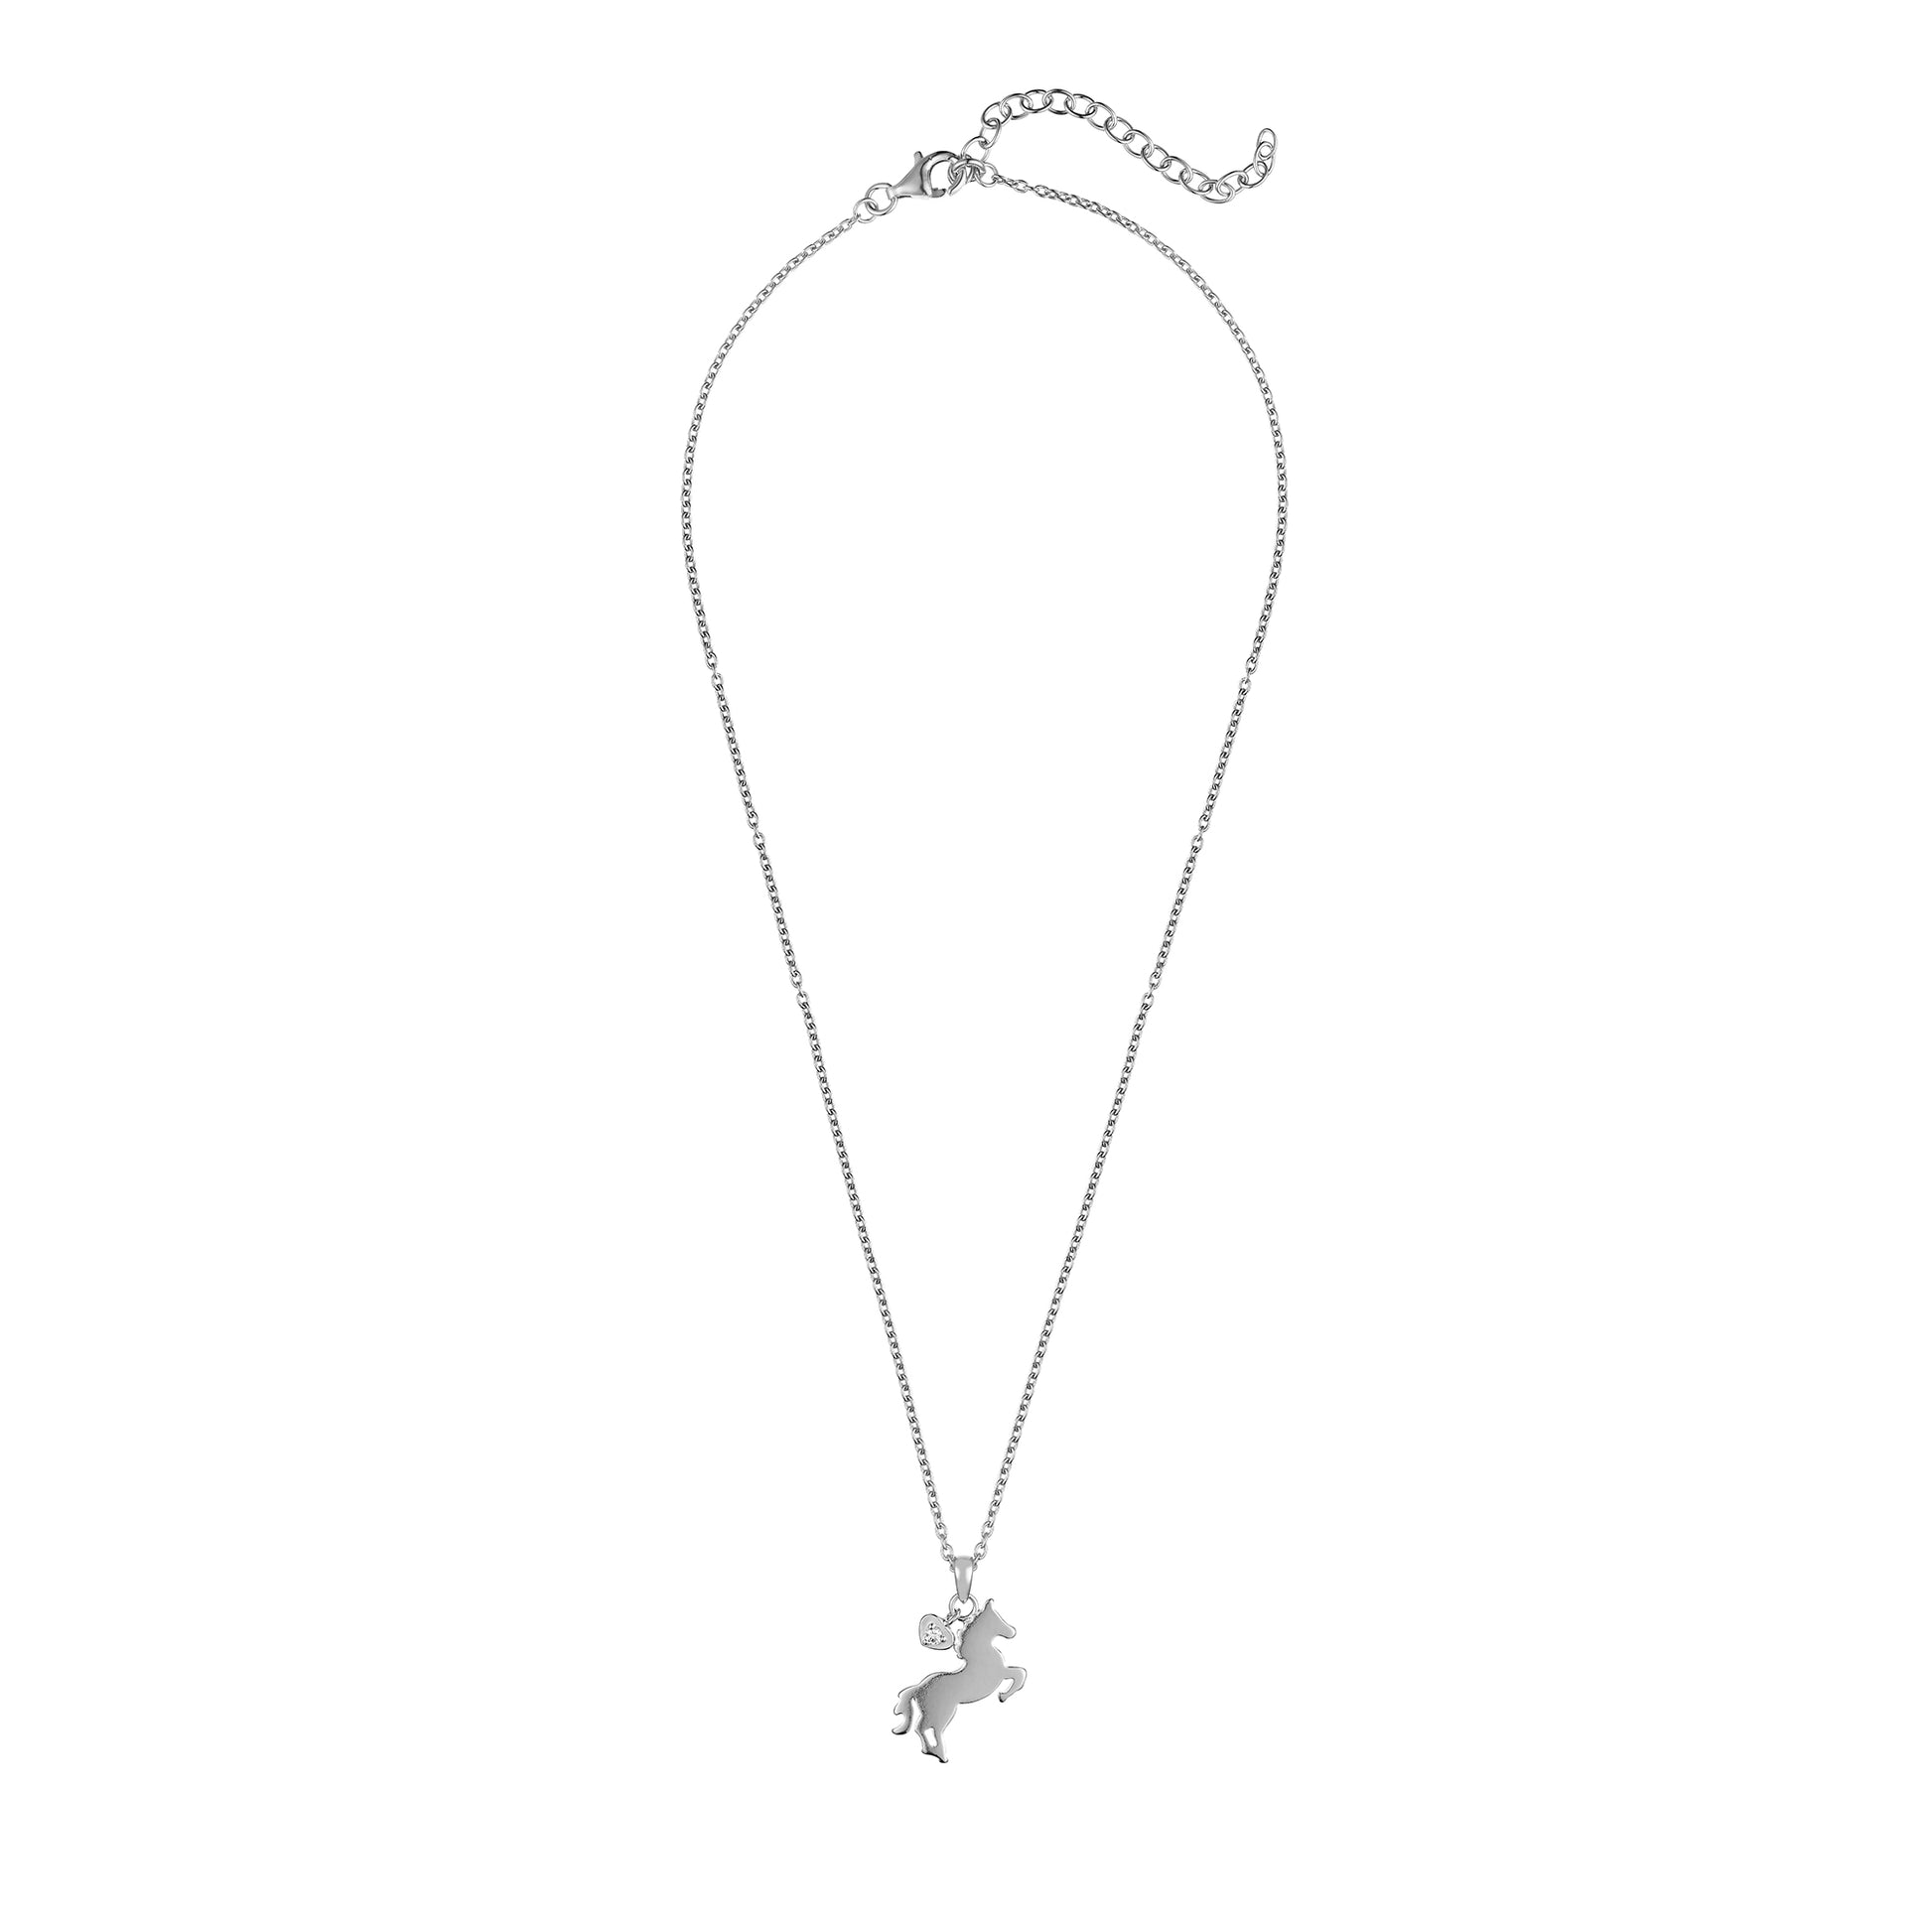 Children's Sterling Silver Horse Pendant with Sapphire Charm on an Extendable Chain Necklace